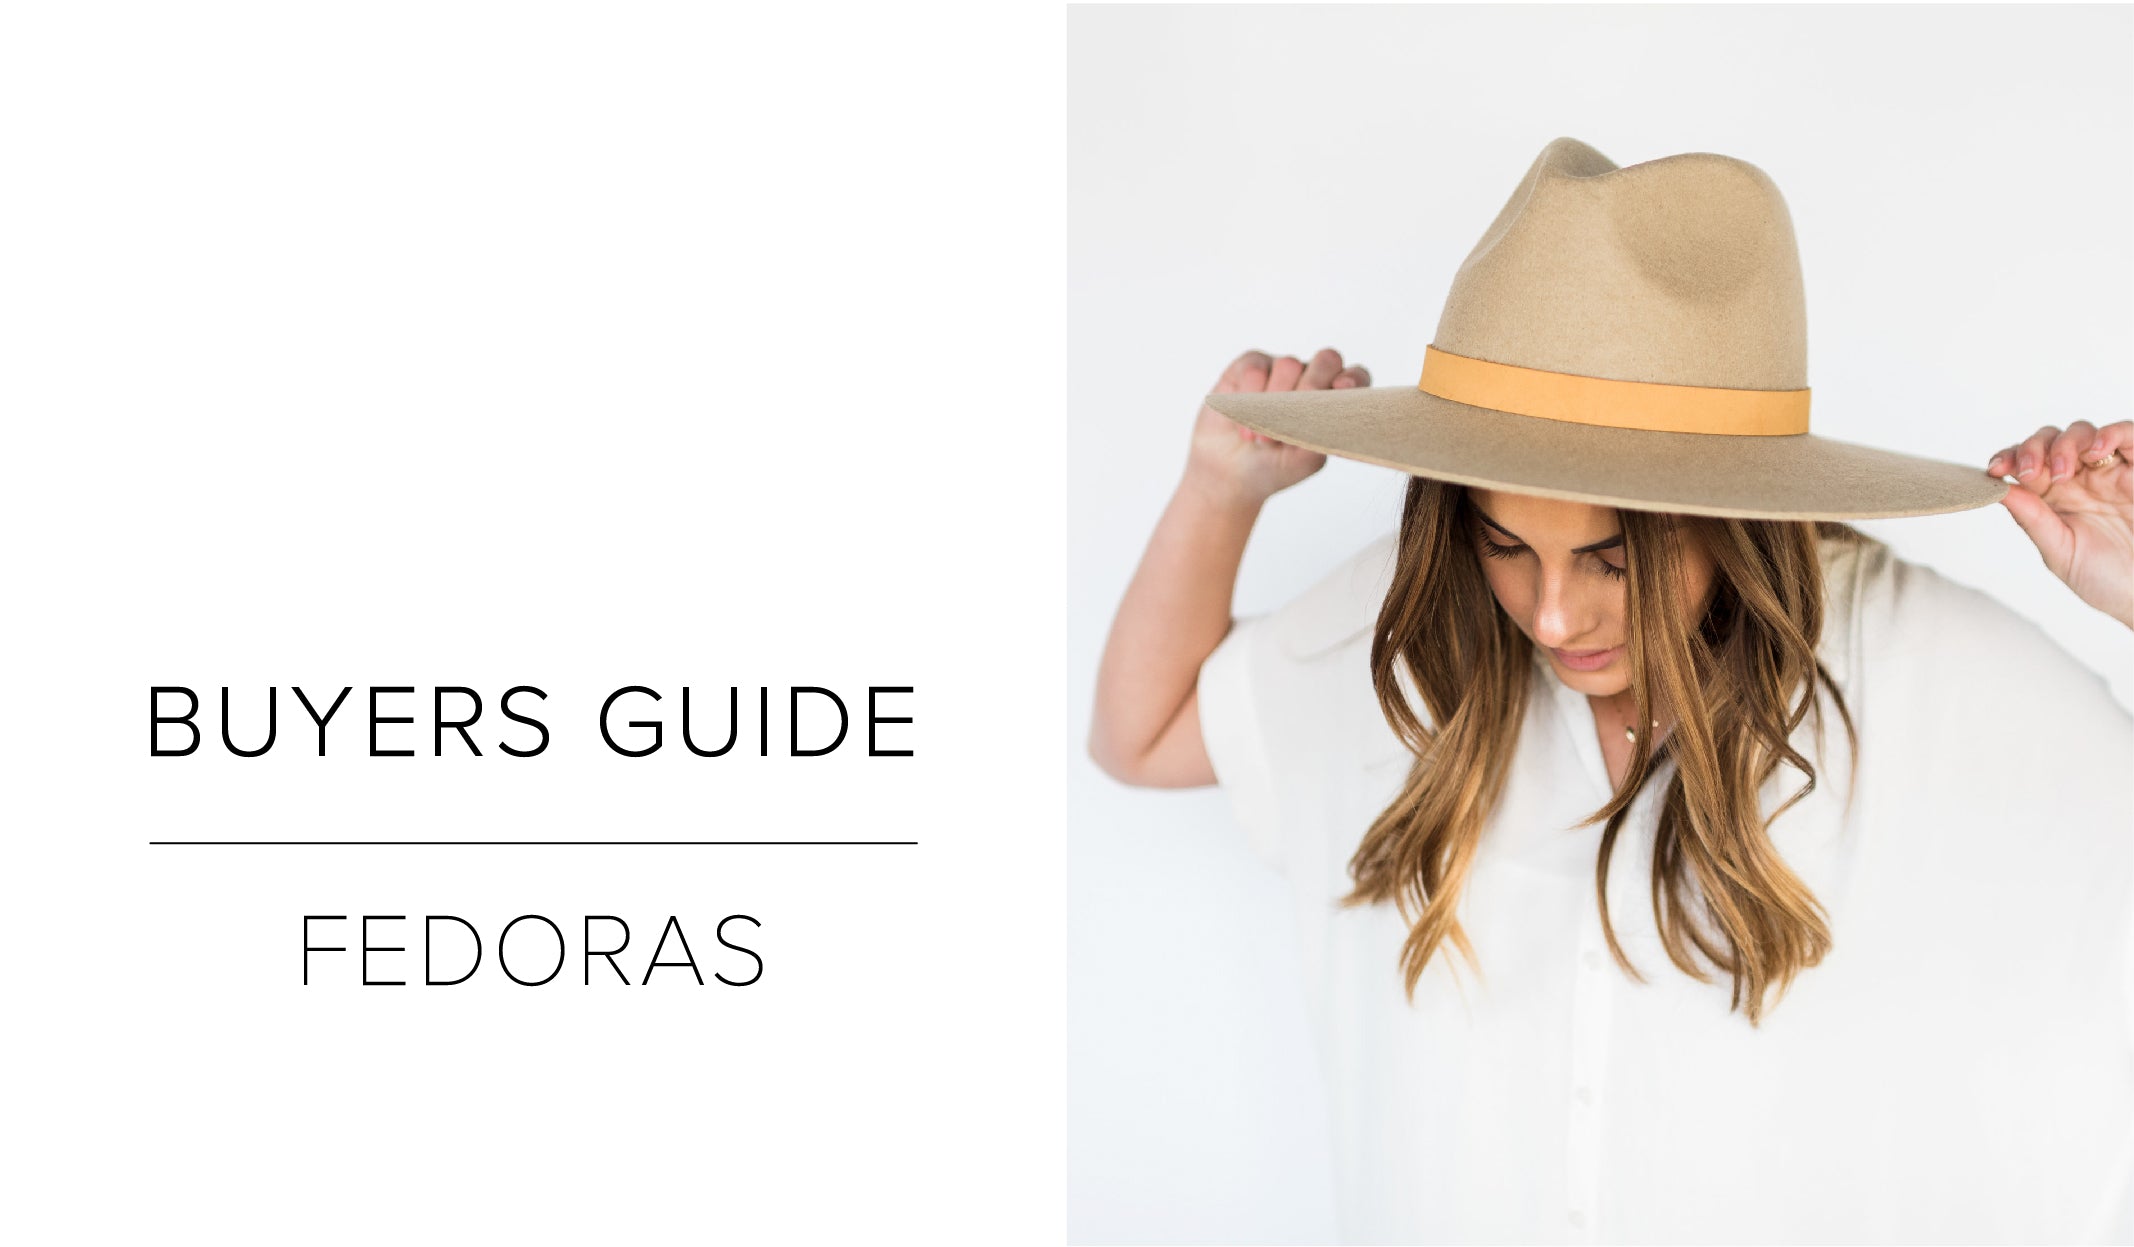 Buyers guide to fedoras